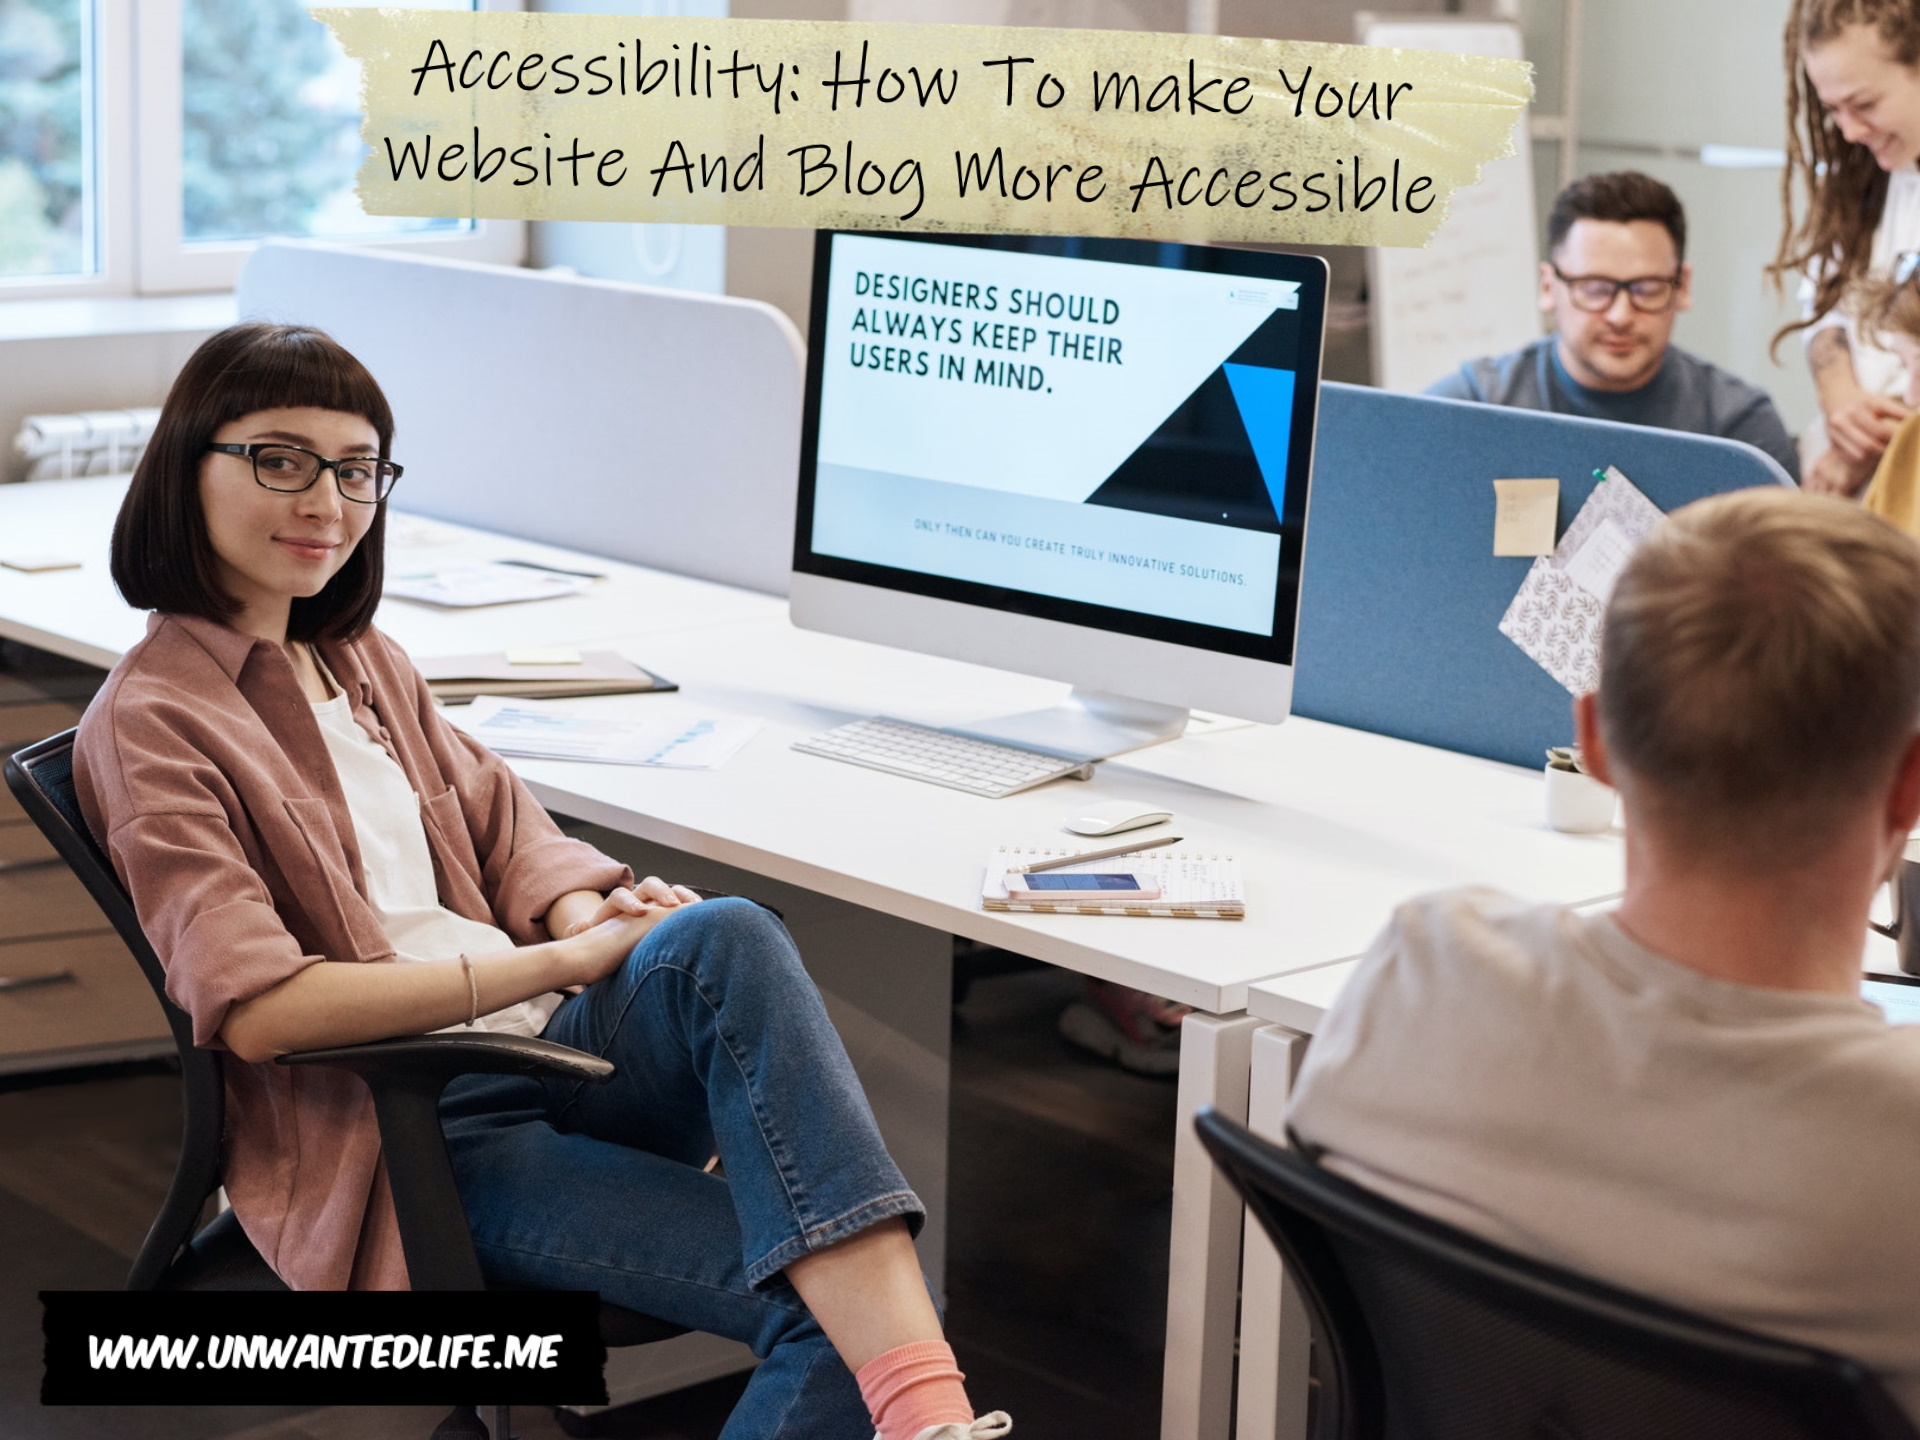 A photo of a white woman in glasses sitting in front of a computer that displays the message "Designers should always keep their users in mind" to represent the topic of the article - Accessibility: How To make Your Website And Blog More Accessible